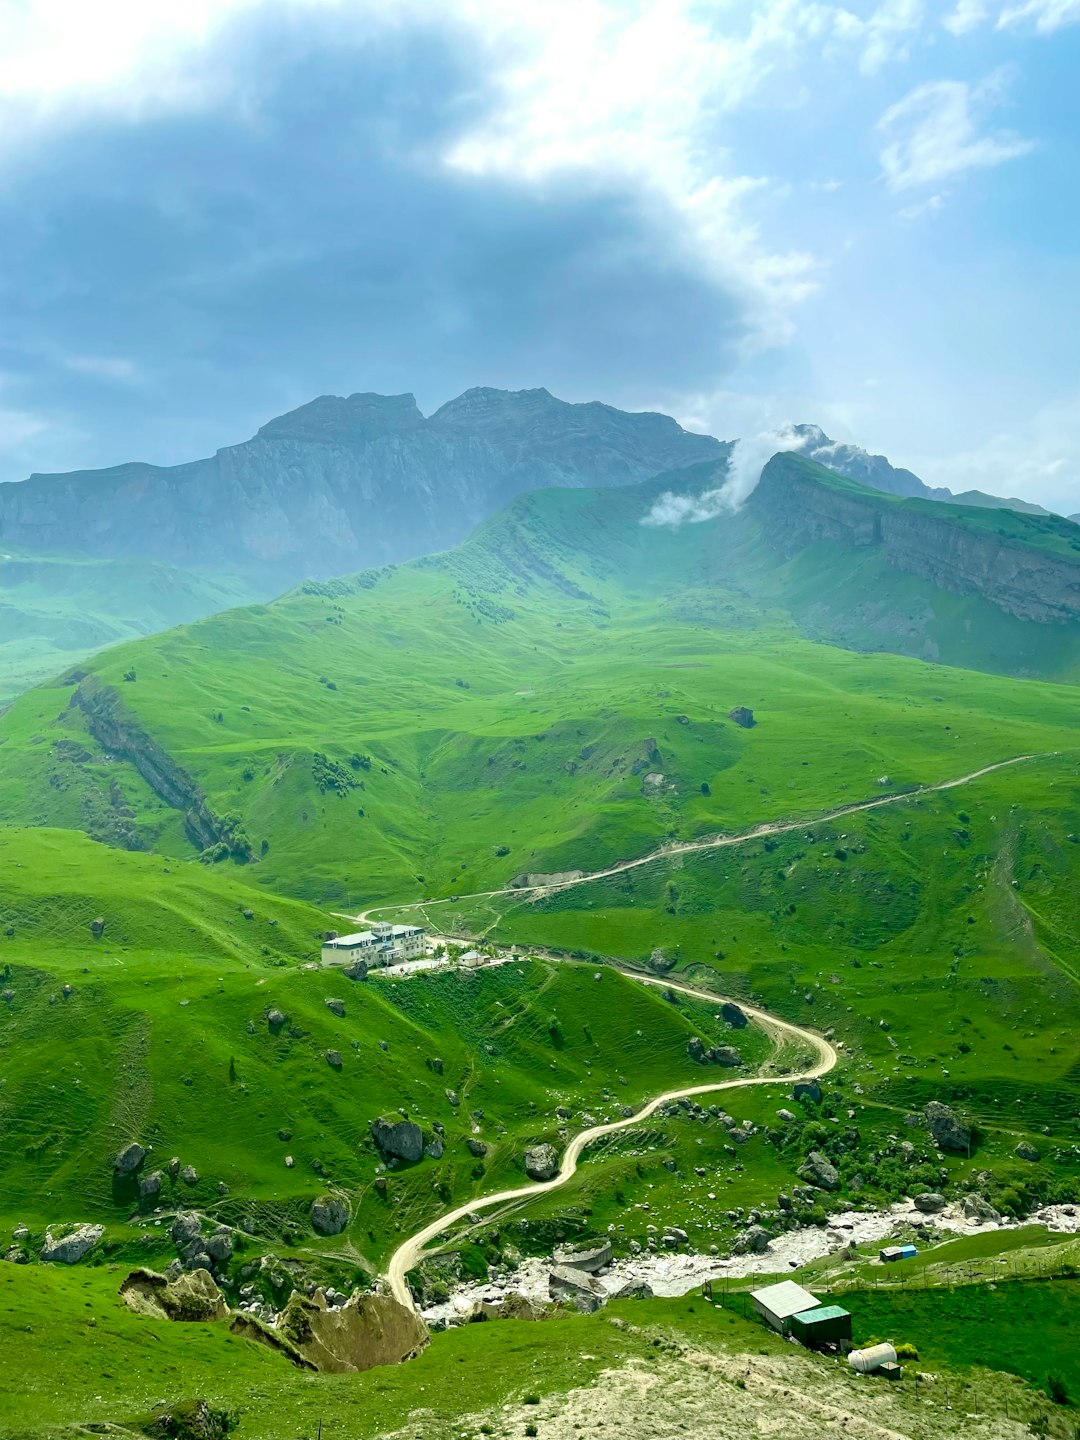 Travel Tips and Stories of Laza in Azerbaijan